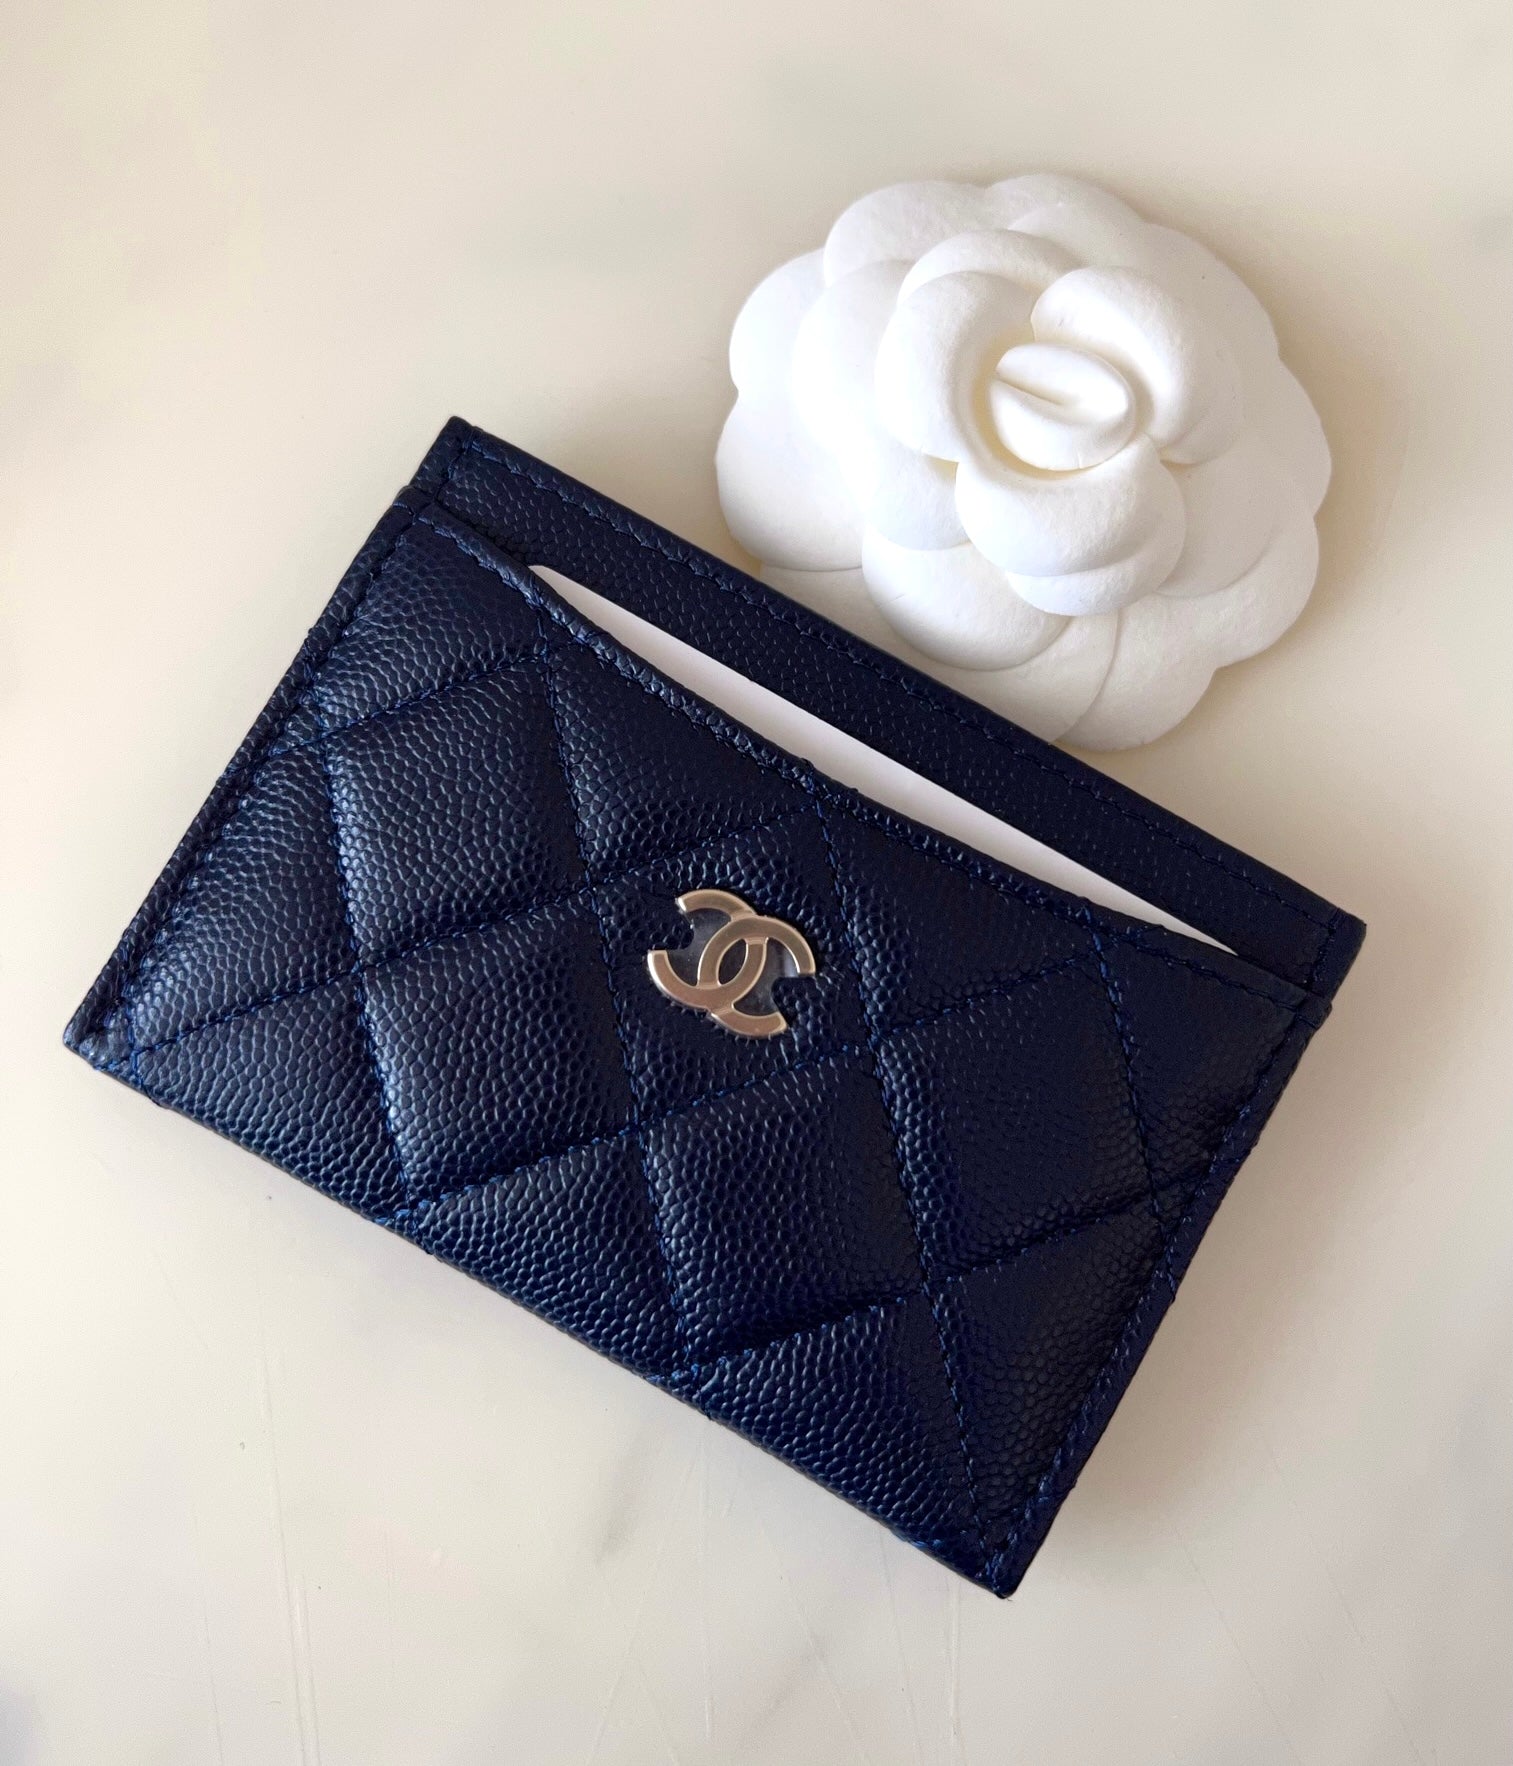 CHANEL 23S Pink Heart Lamb Skin Flat Card Holder Gold Hardware – AYAINLOVE  CURATED LUXURIES